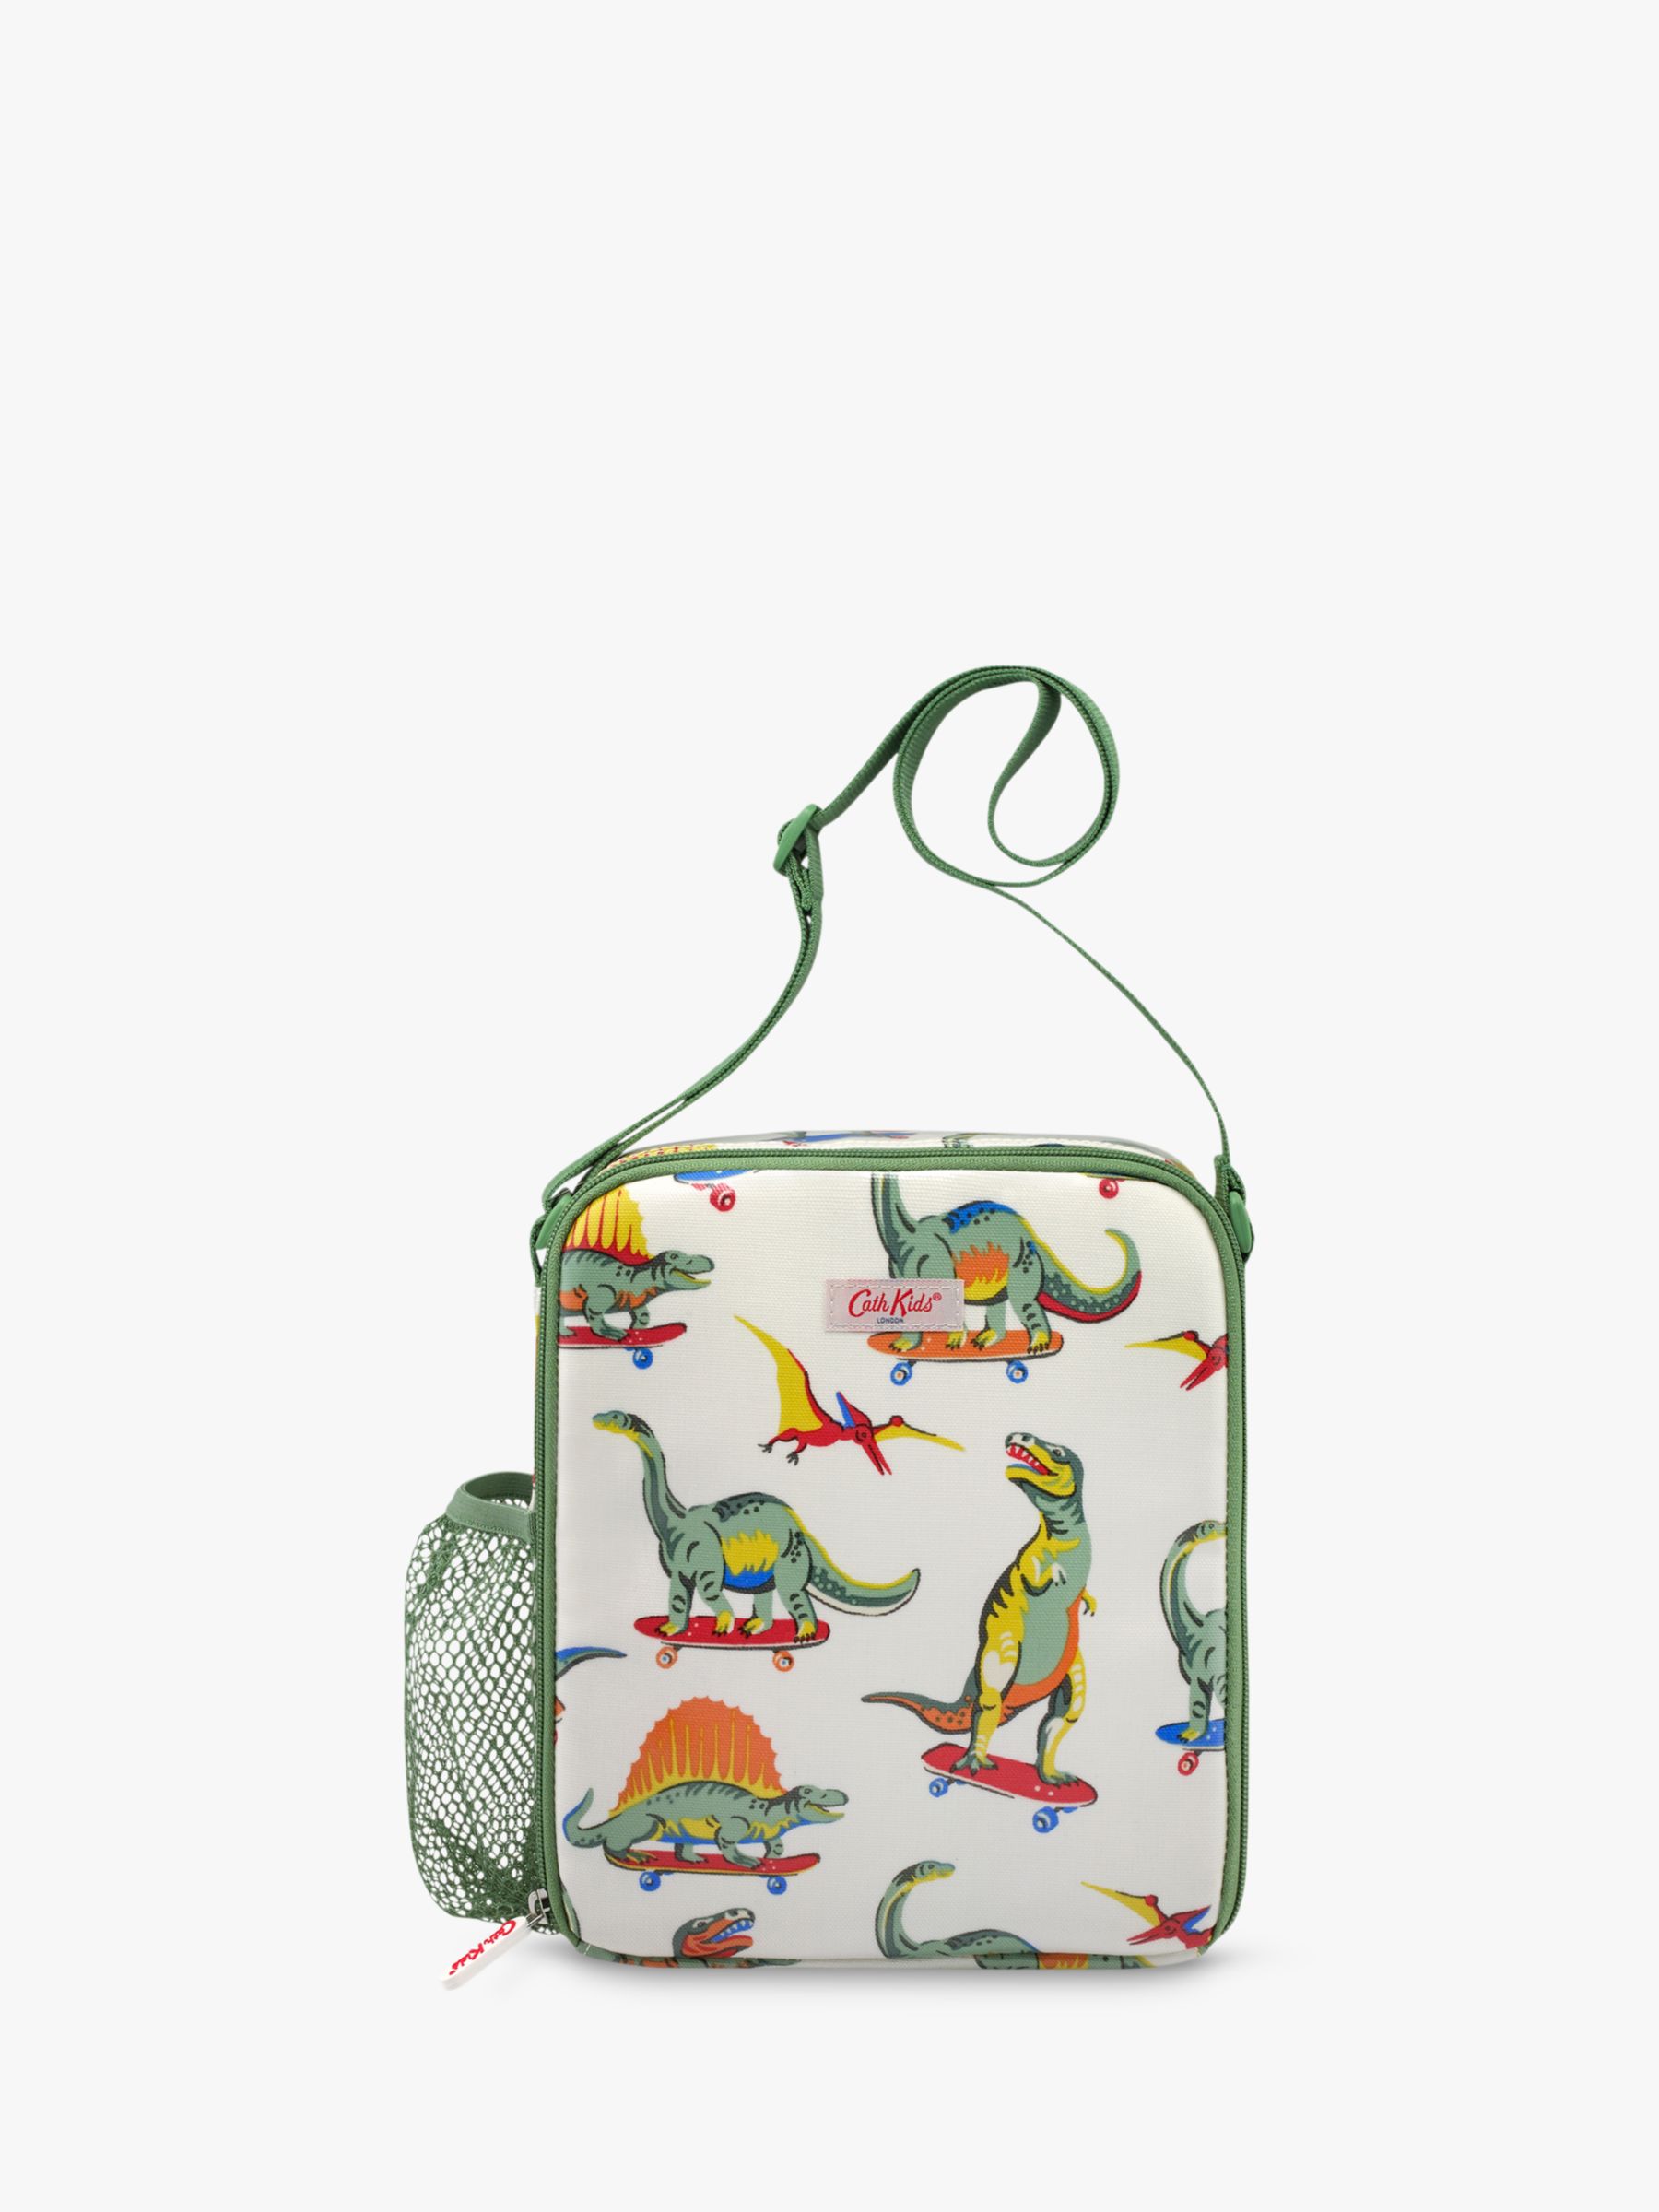 cath kidston insulated lunch bag